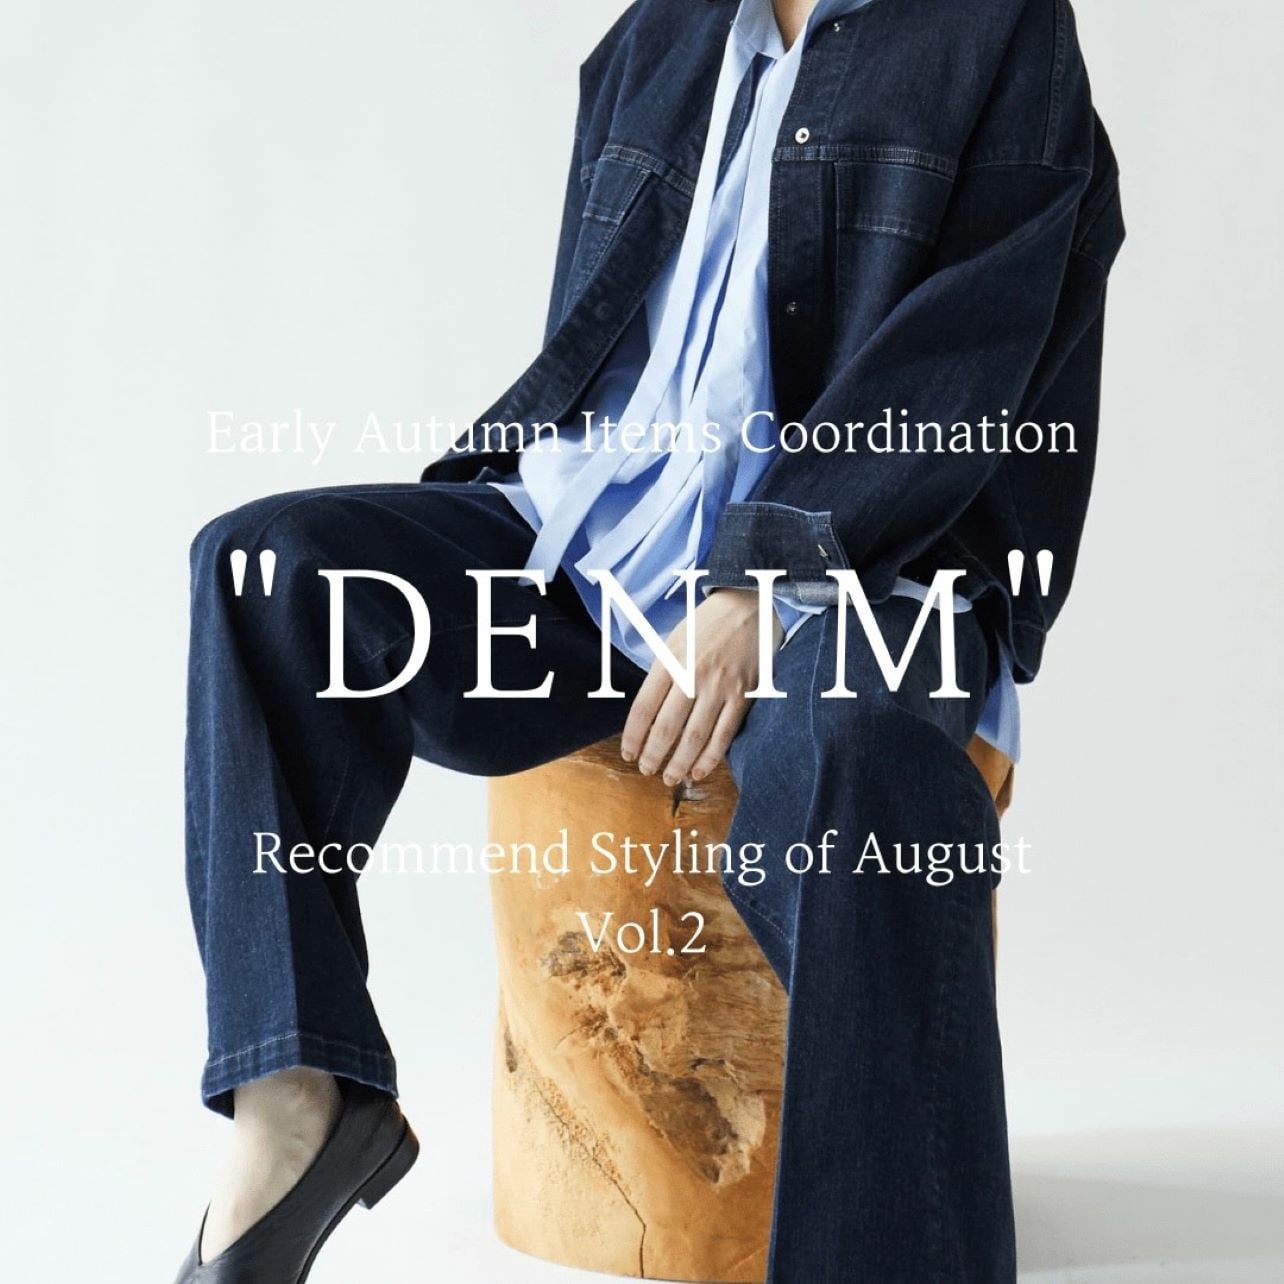 Recommend Styling of August Vol.2 "DENIM"